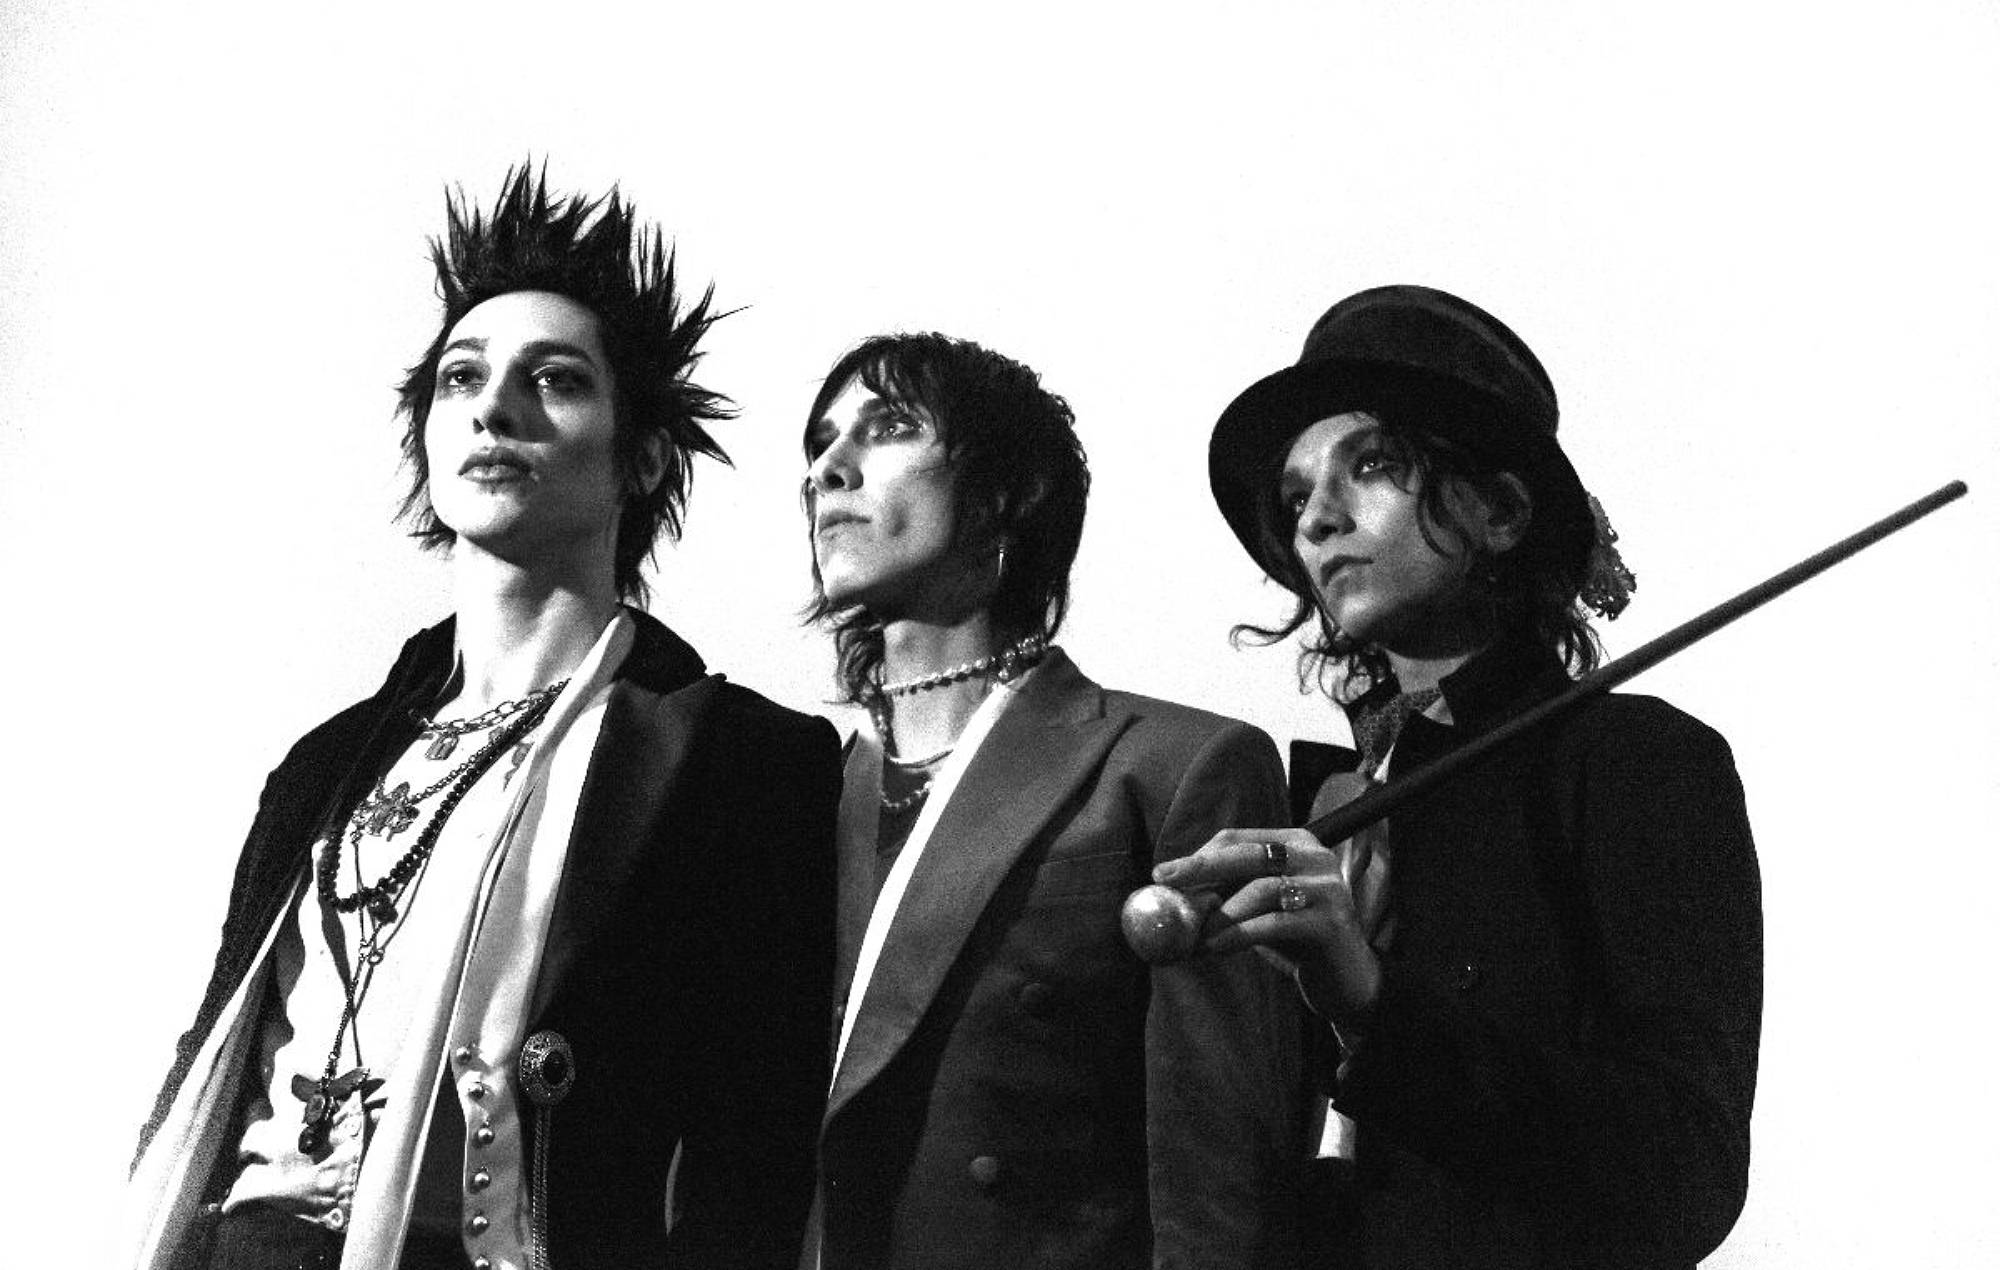 Palaye Royale share ‘Lifeless Stars’ and tell us about their Libertines-inspired new album